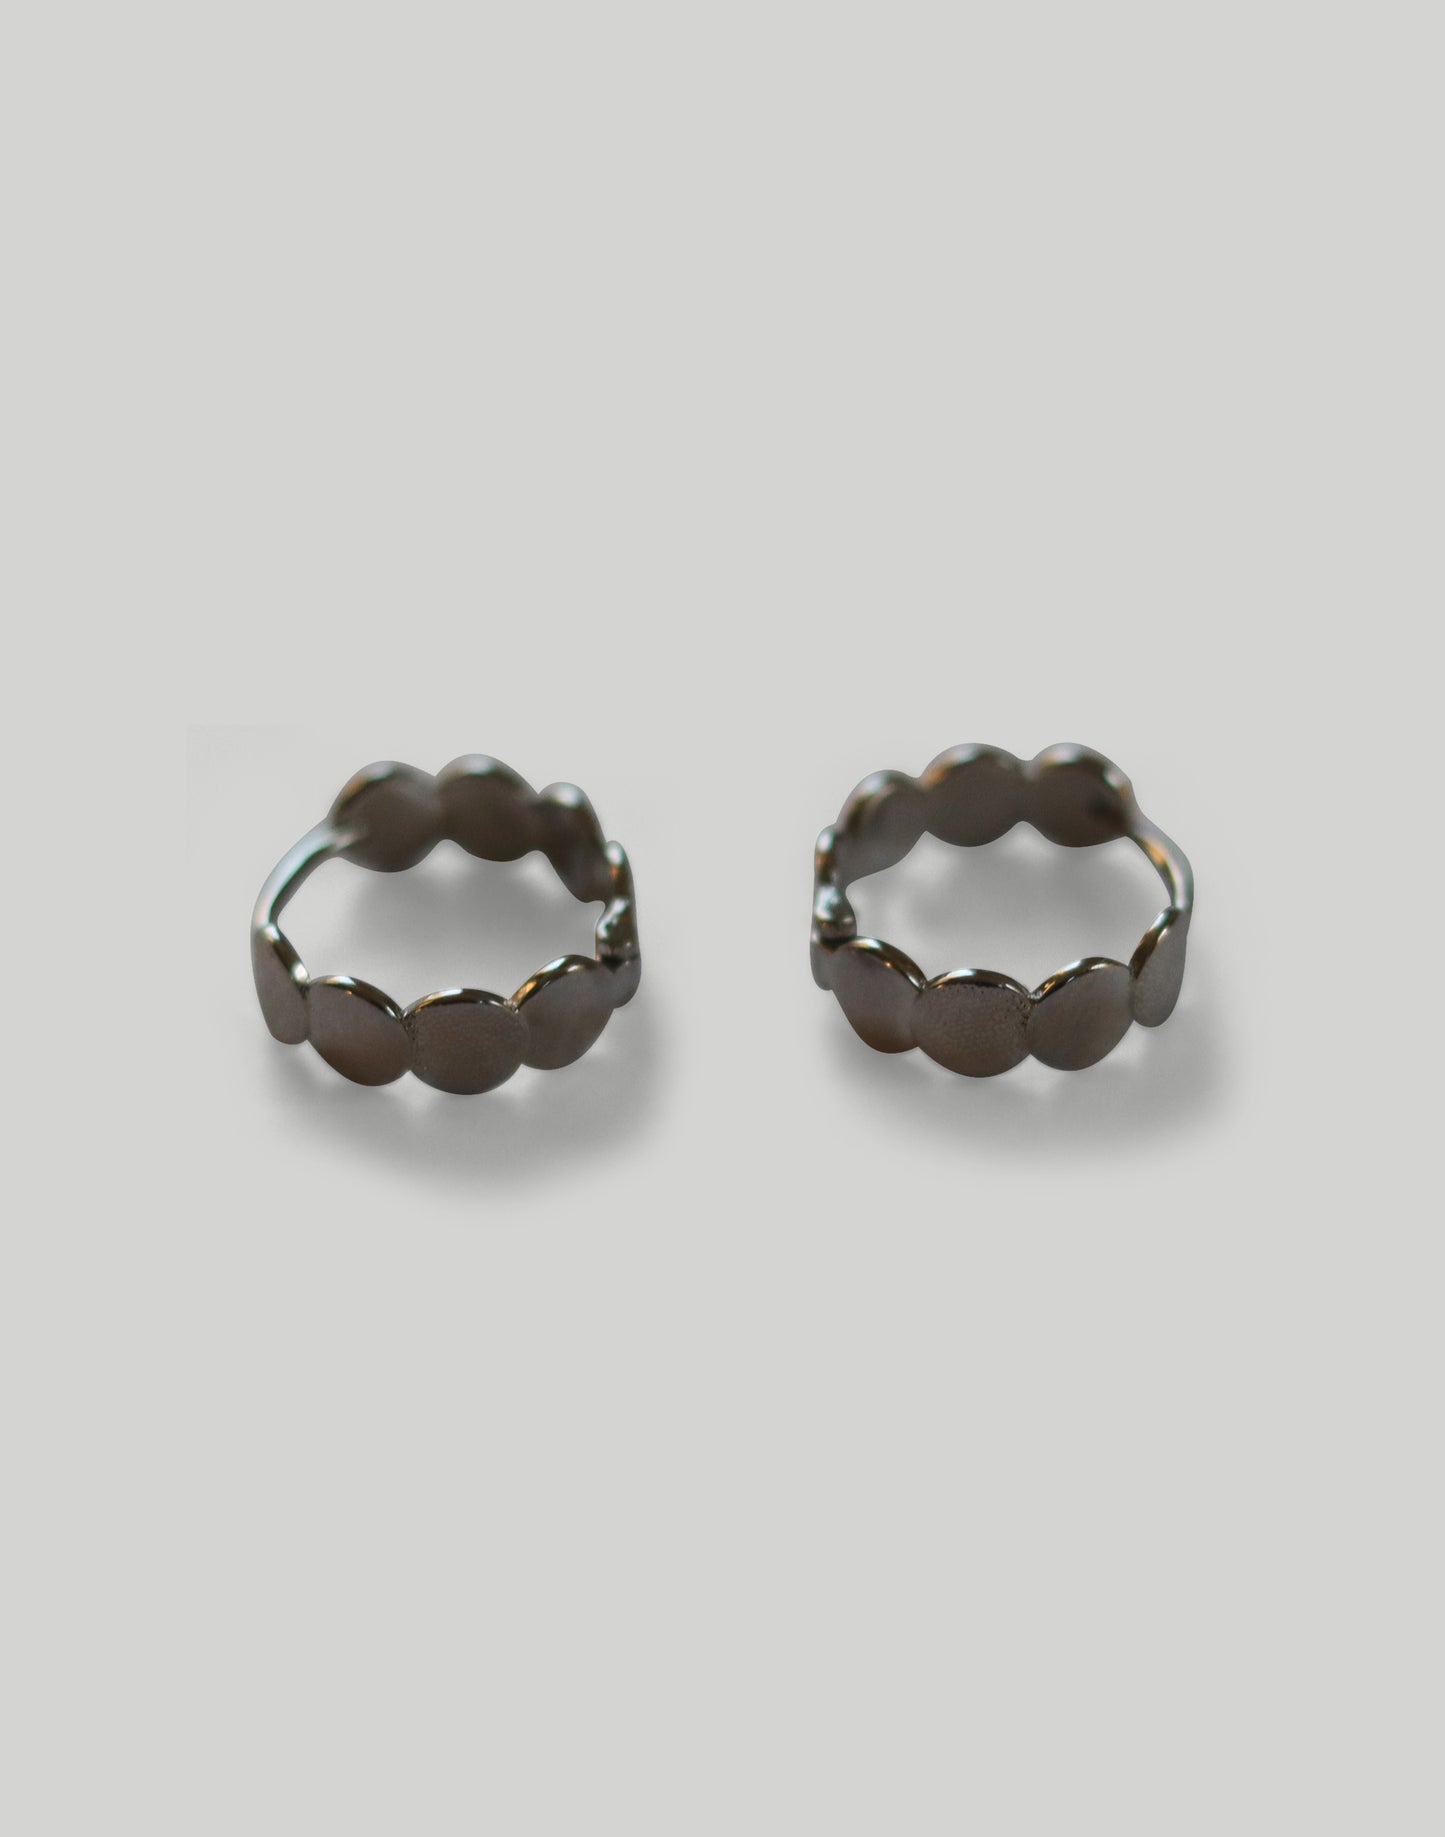 The Round Dotted Huggie Earrings